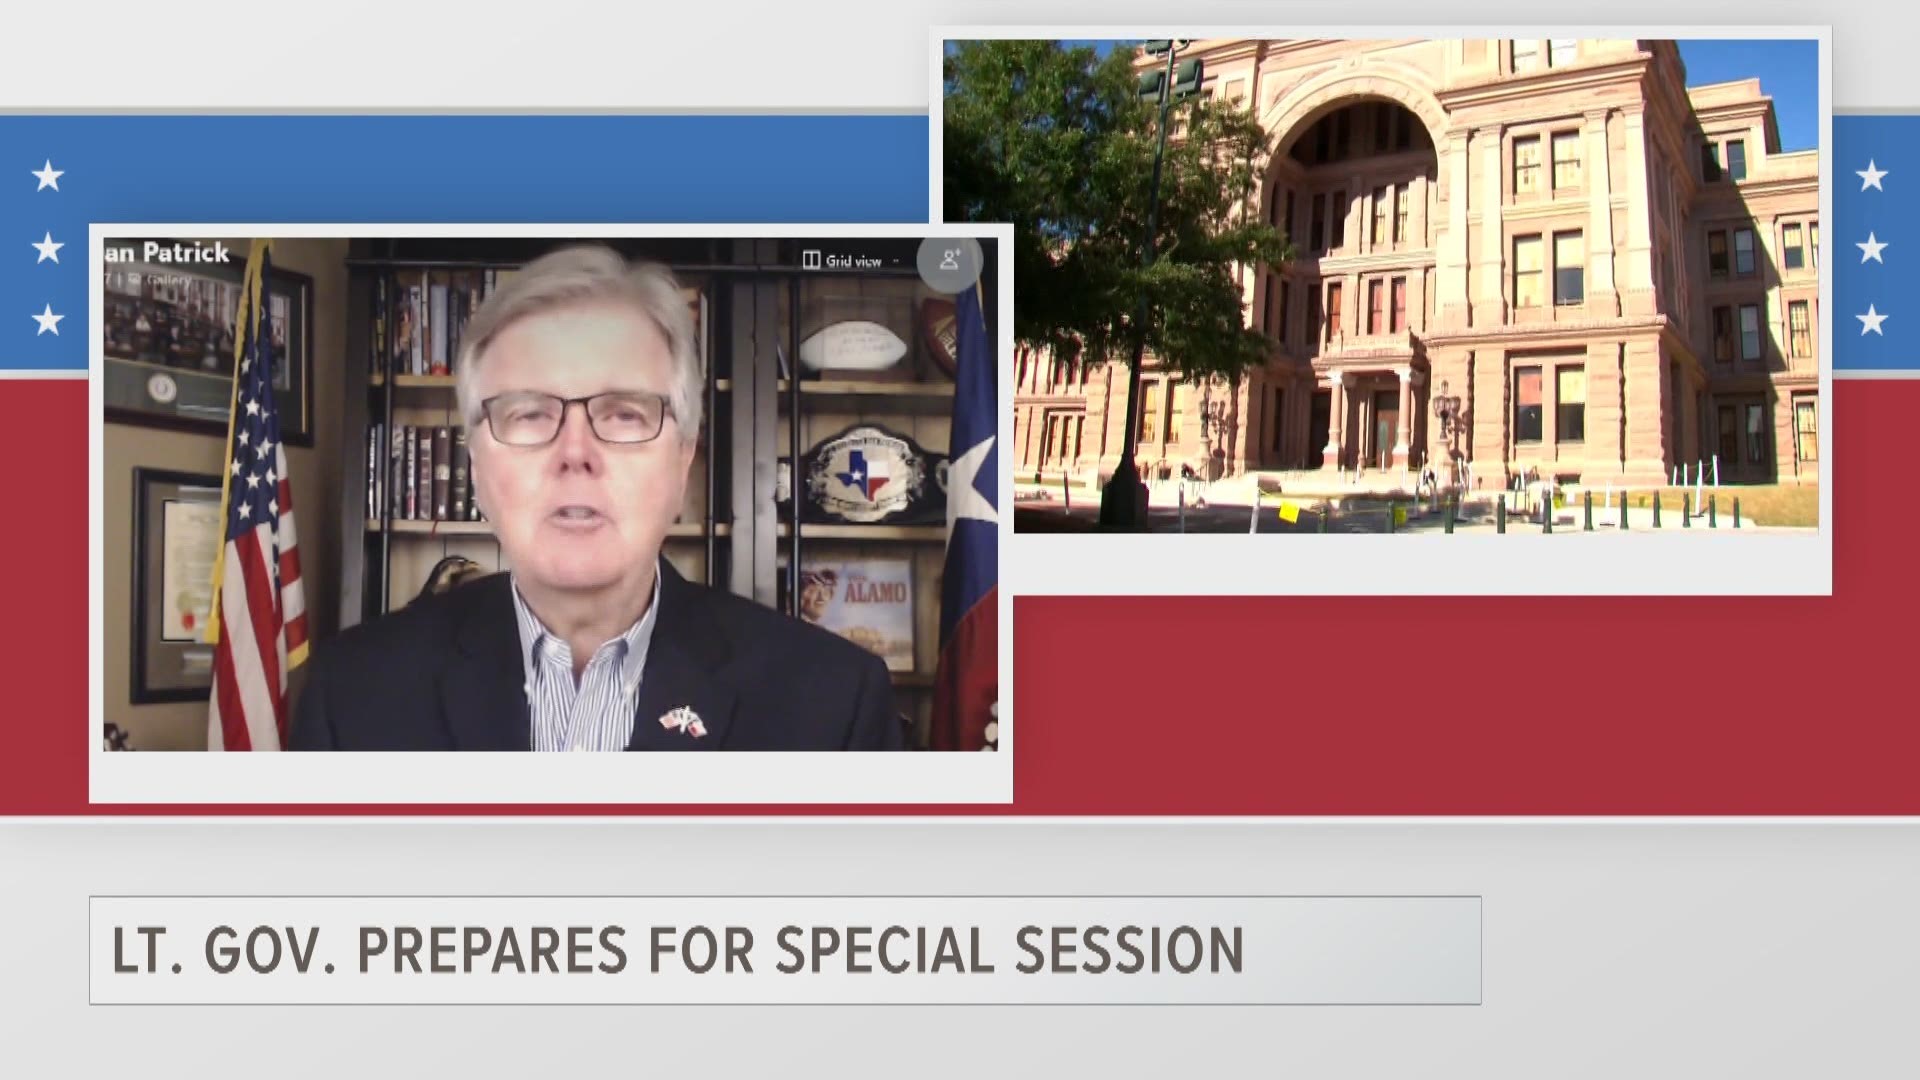 Texas Lt. Gov. Dan Patrick talks about the election bill that Democrats killed, priorities that did and didn't pass, and the bills expected in a special session